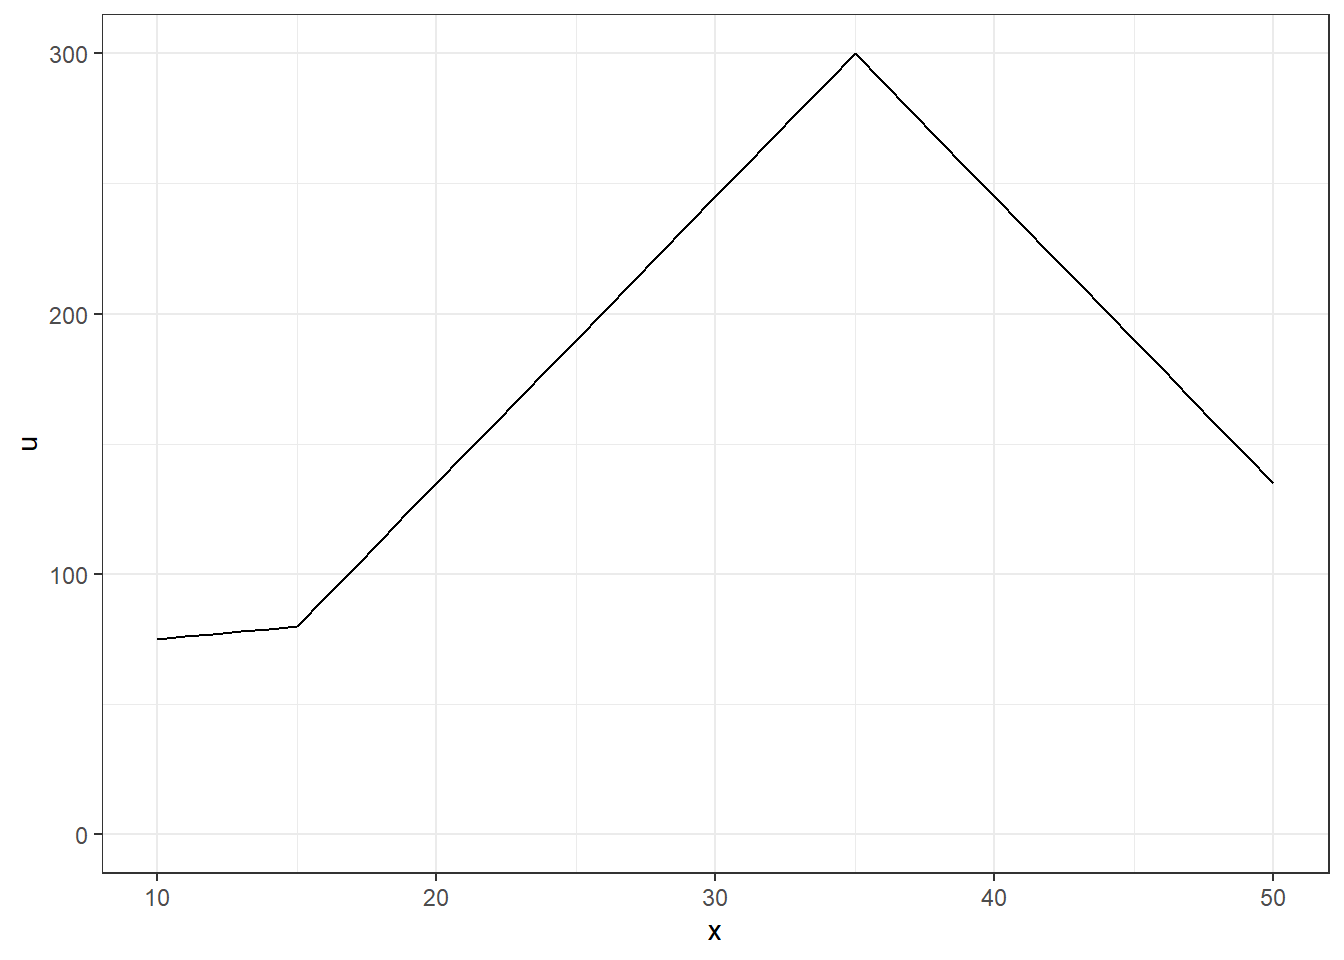 An example of a payoff function.